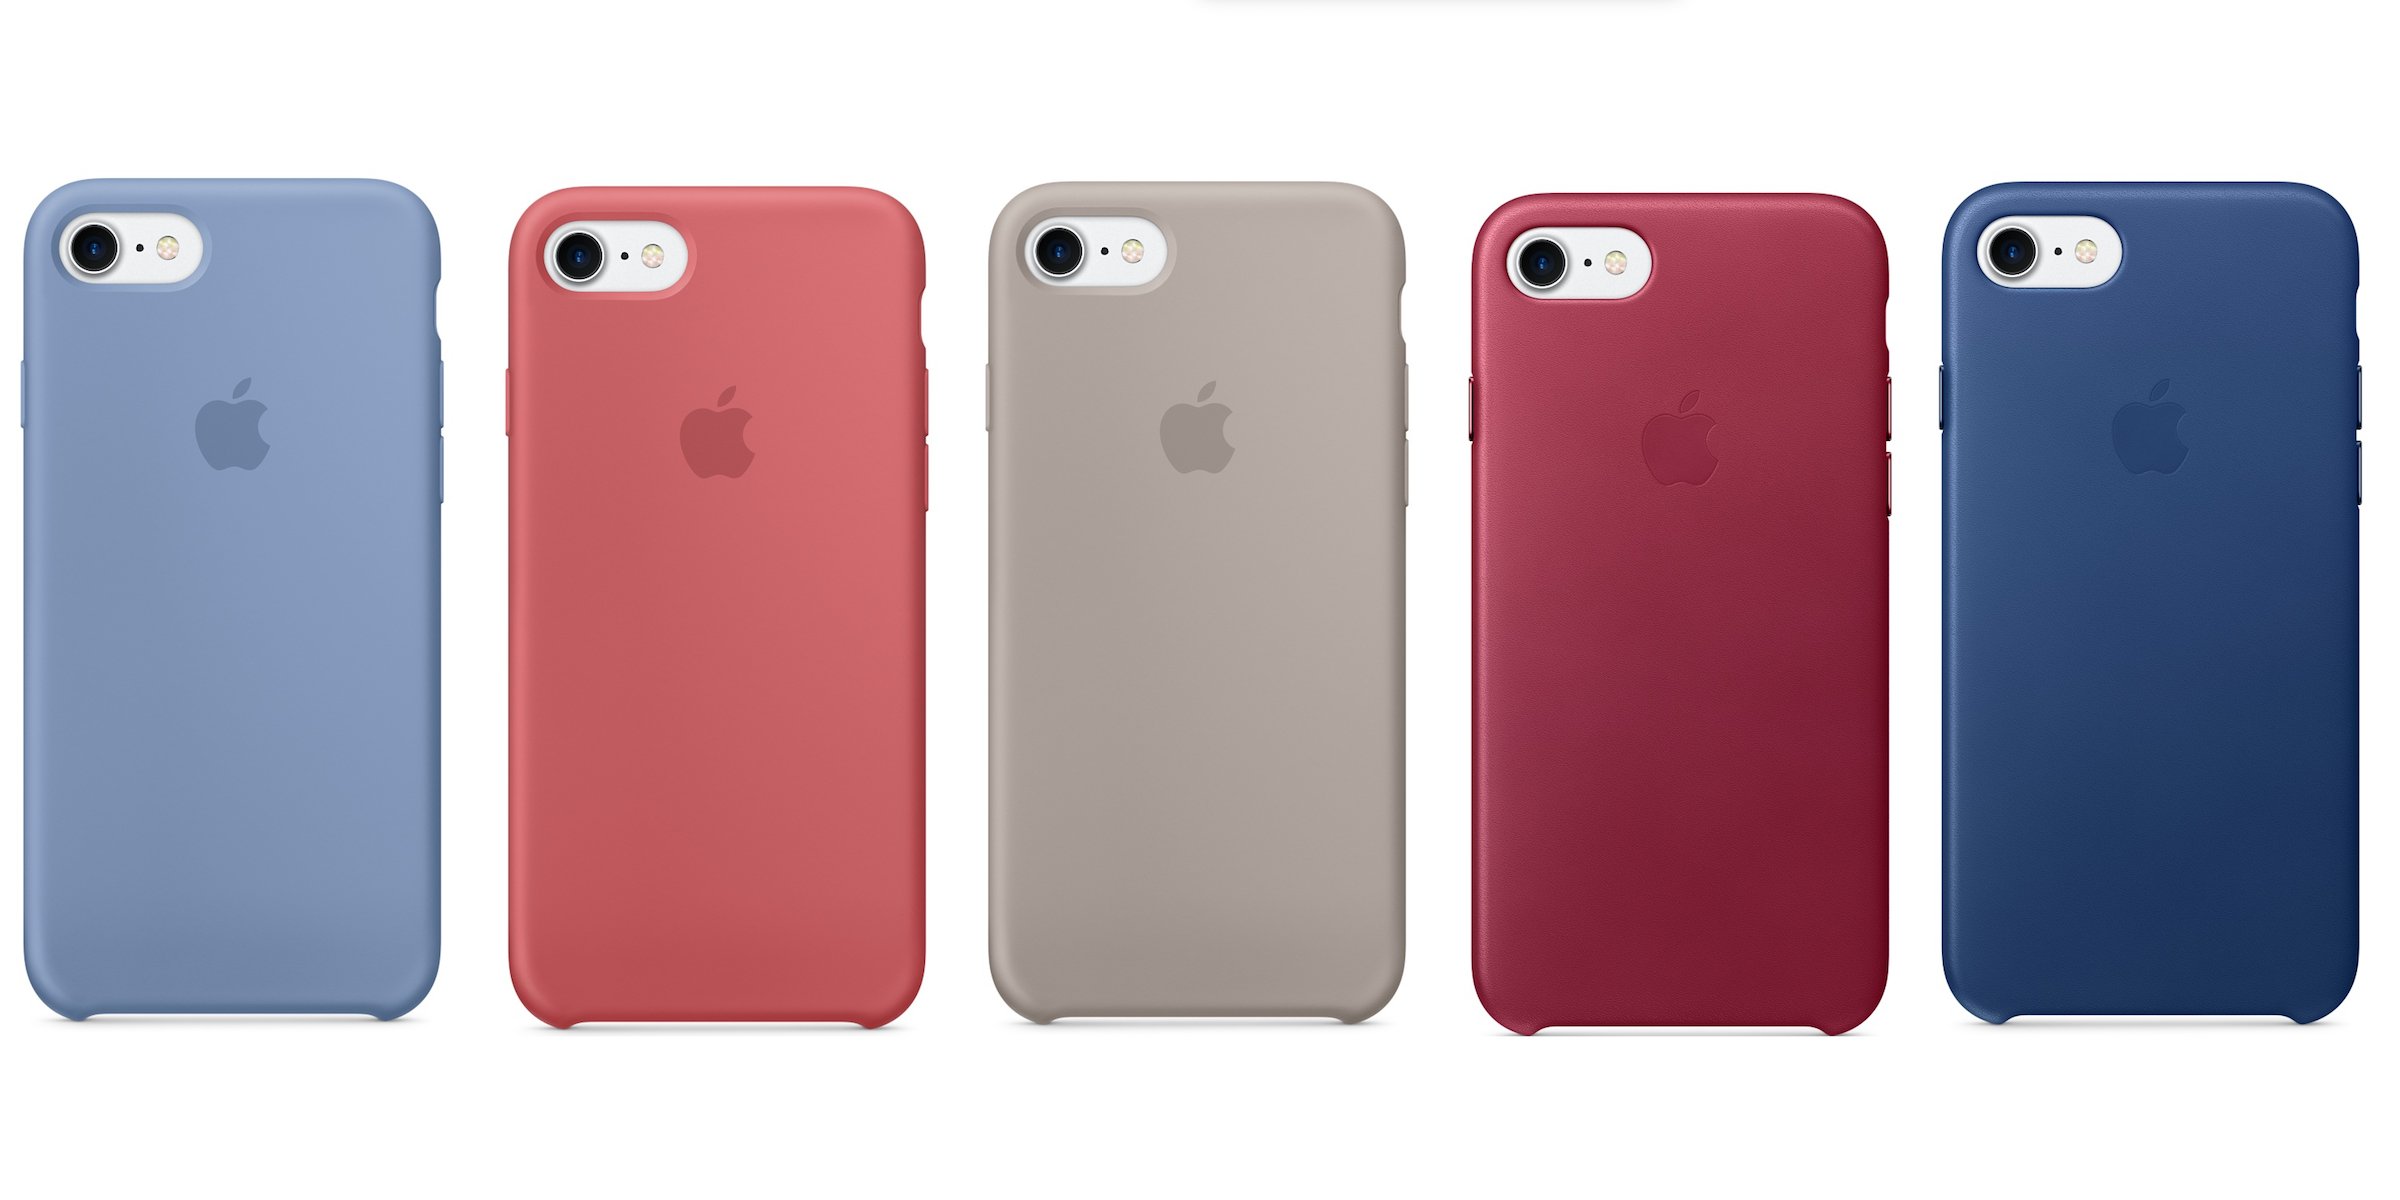 Anger Flyvningen Hørehæmmet 9to5Mac on Twitter: "Apple launches six new iPhone 7/Plus case colors,  matching new silicone &amp; leather Watch bands https://t.co/dJ192HvwME  https://t.co/1muk3nc8Eu" / Twitter